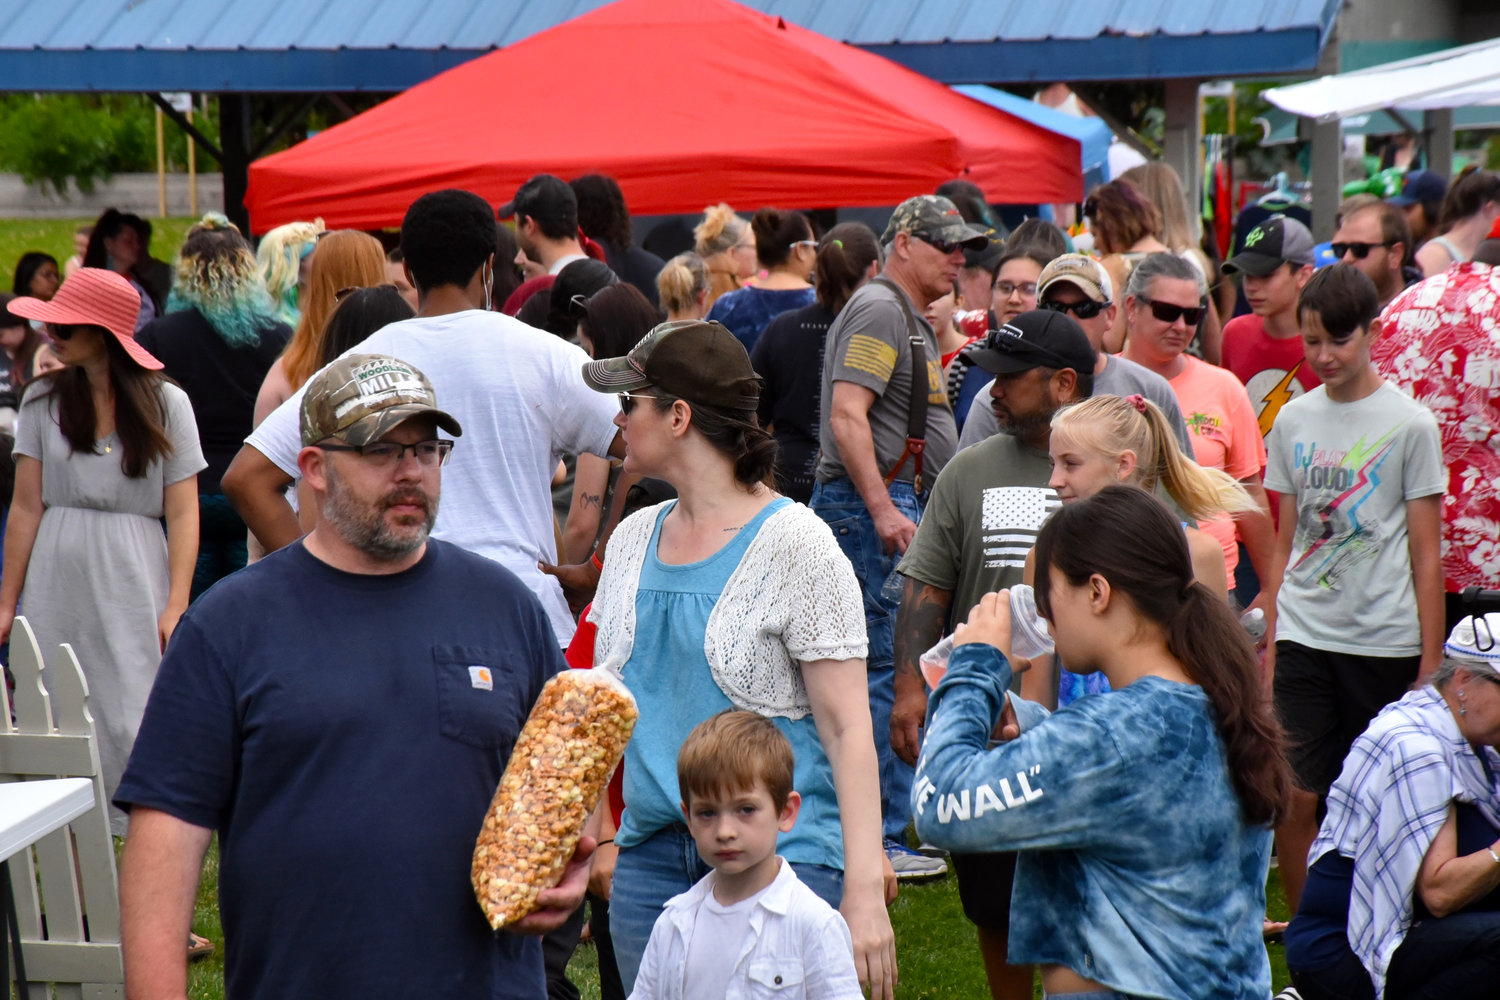 More than 3,900 folks came from far and wide to attend the Yelm Mermaid Festival on Saturday, July 17, at Yelm City Park.